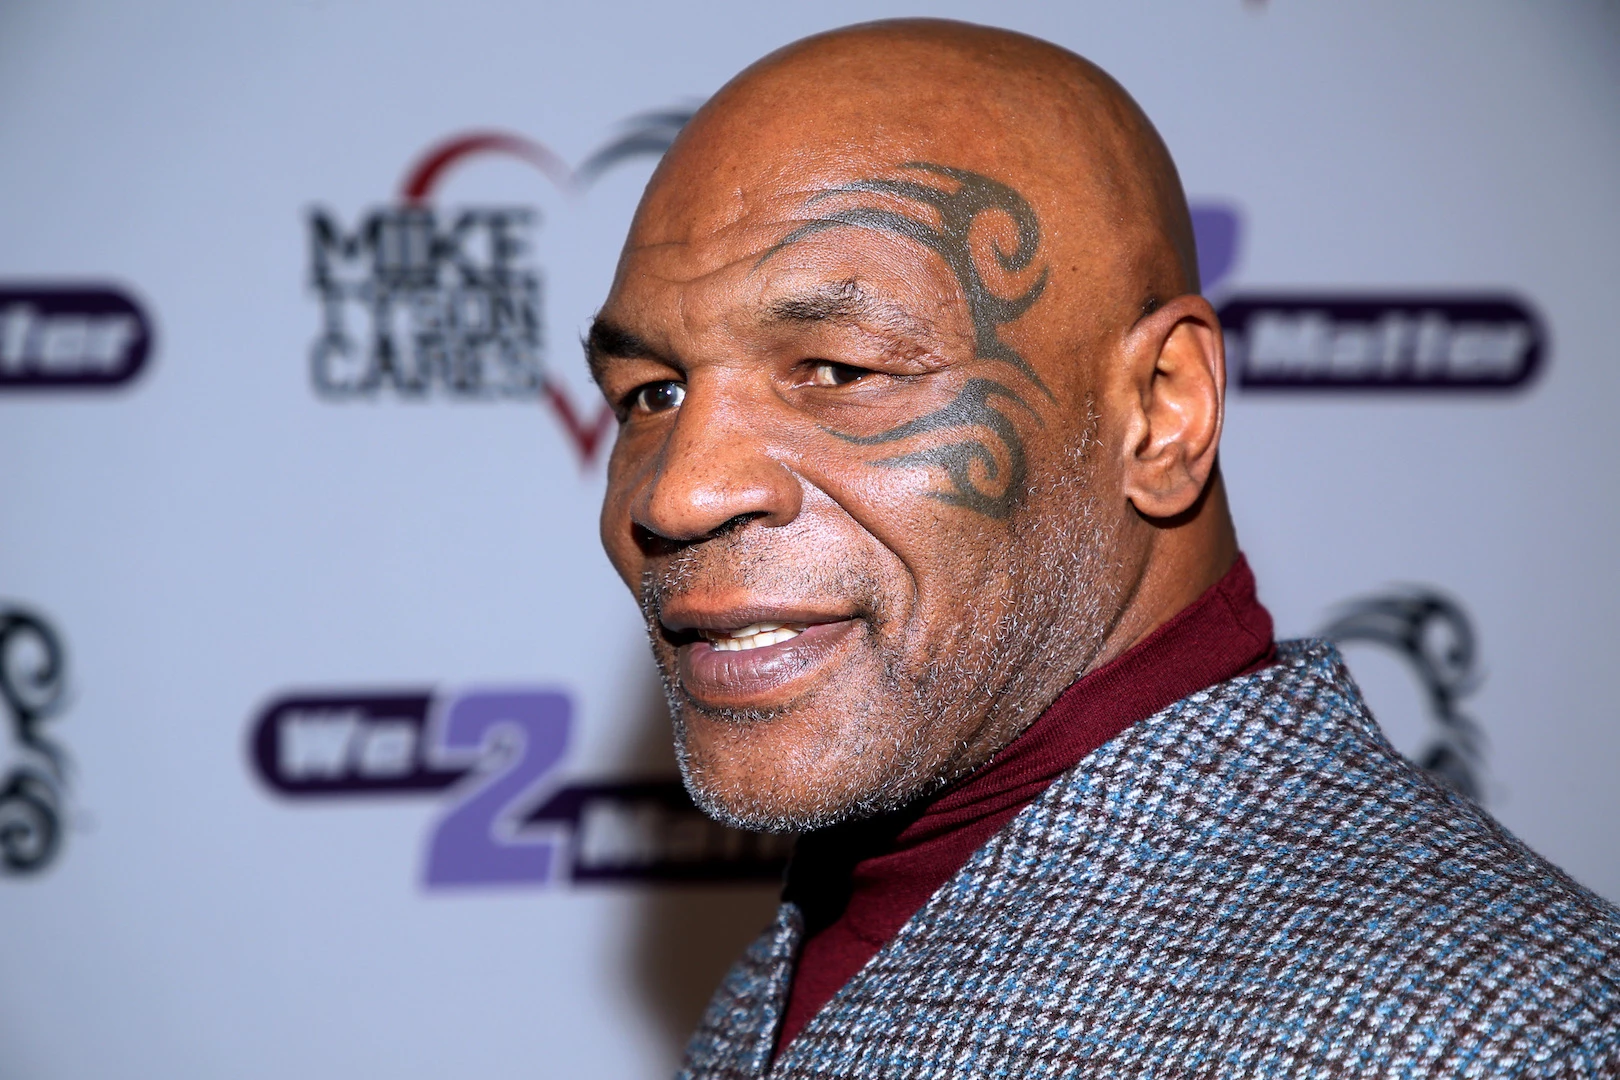 Mike Tyson Says Hulu Stole His Life Story For Series